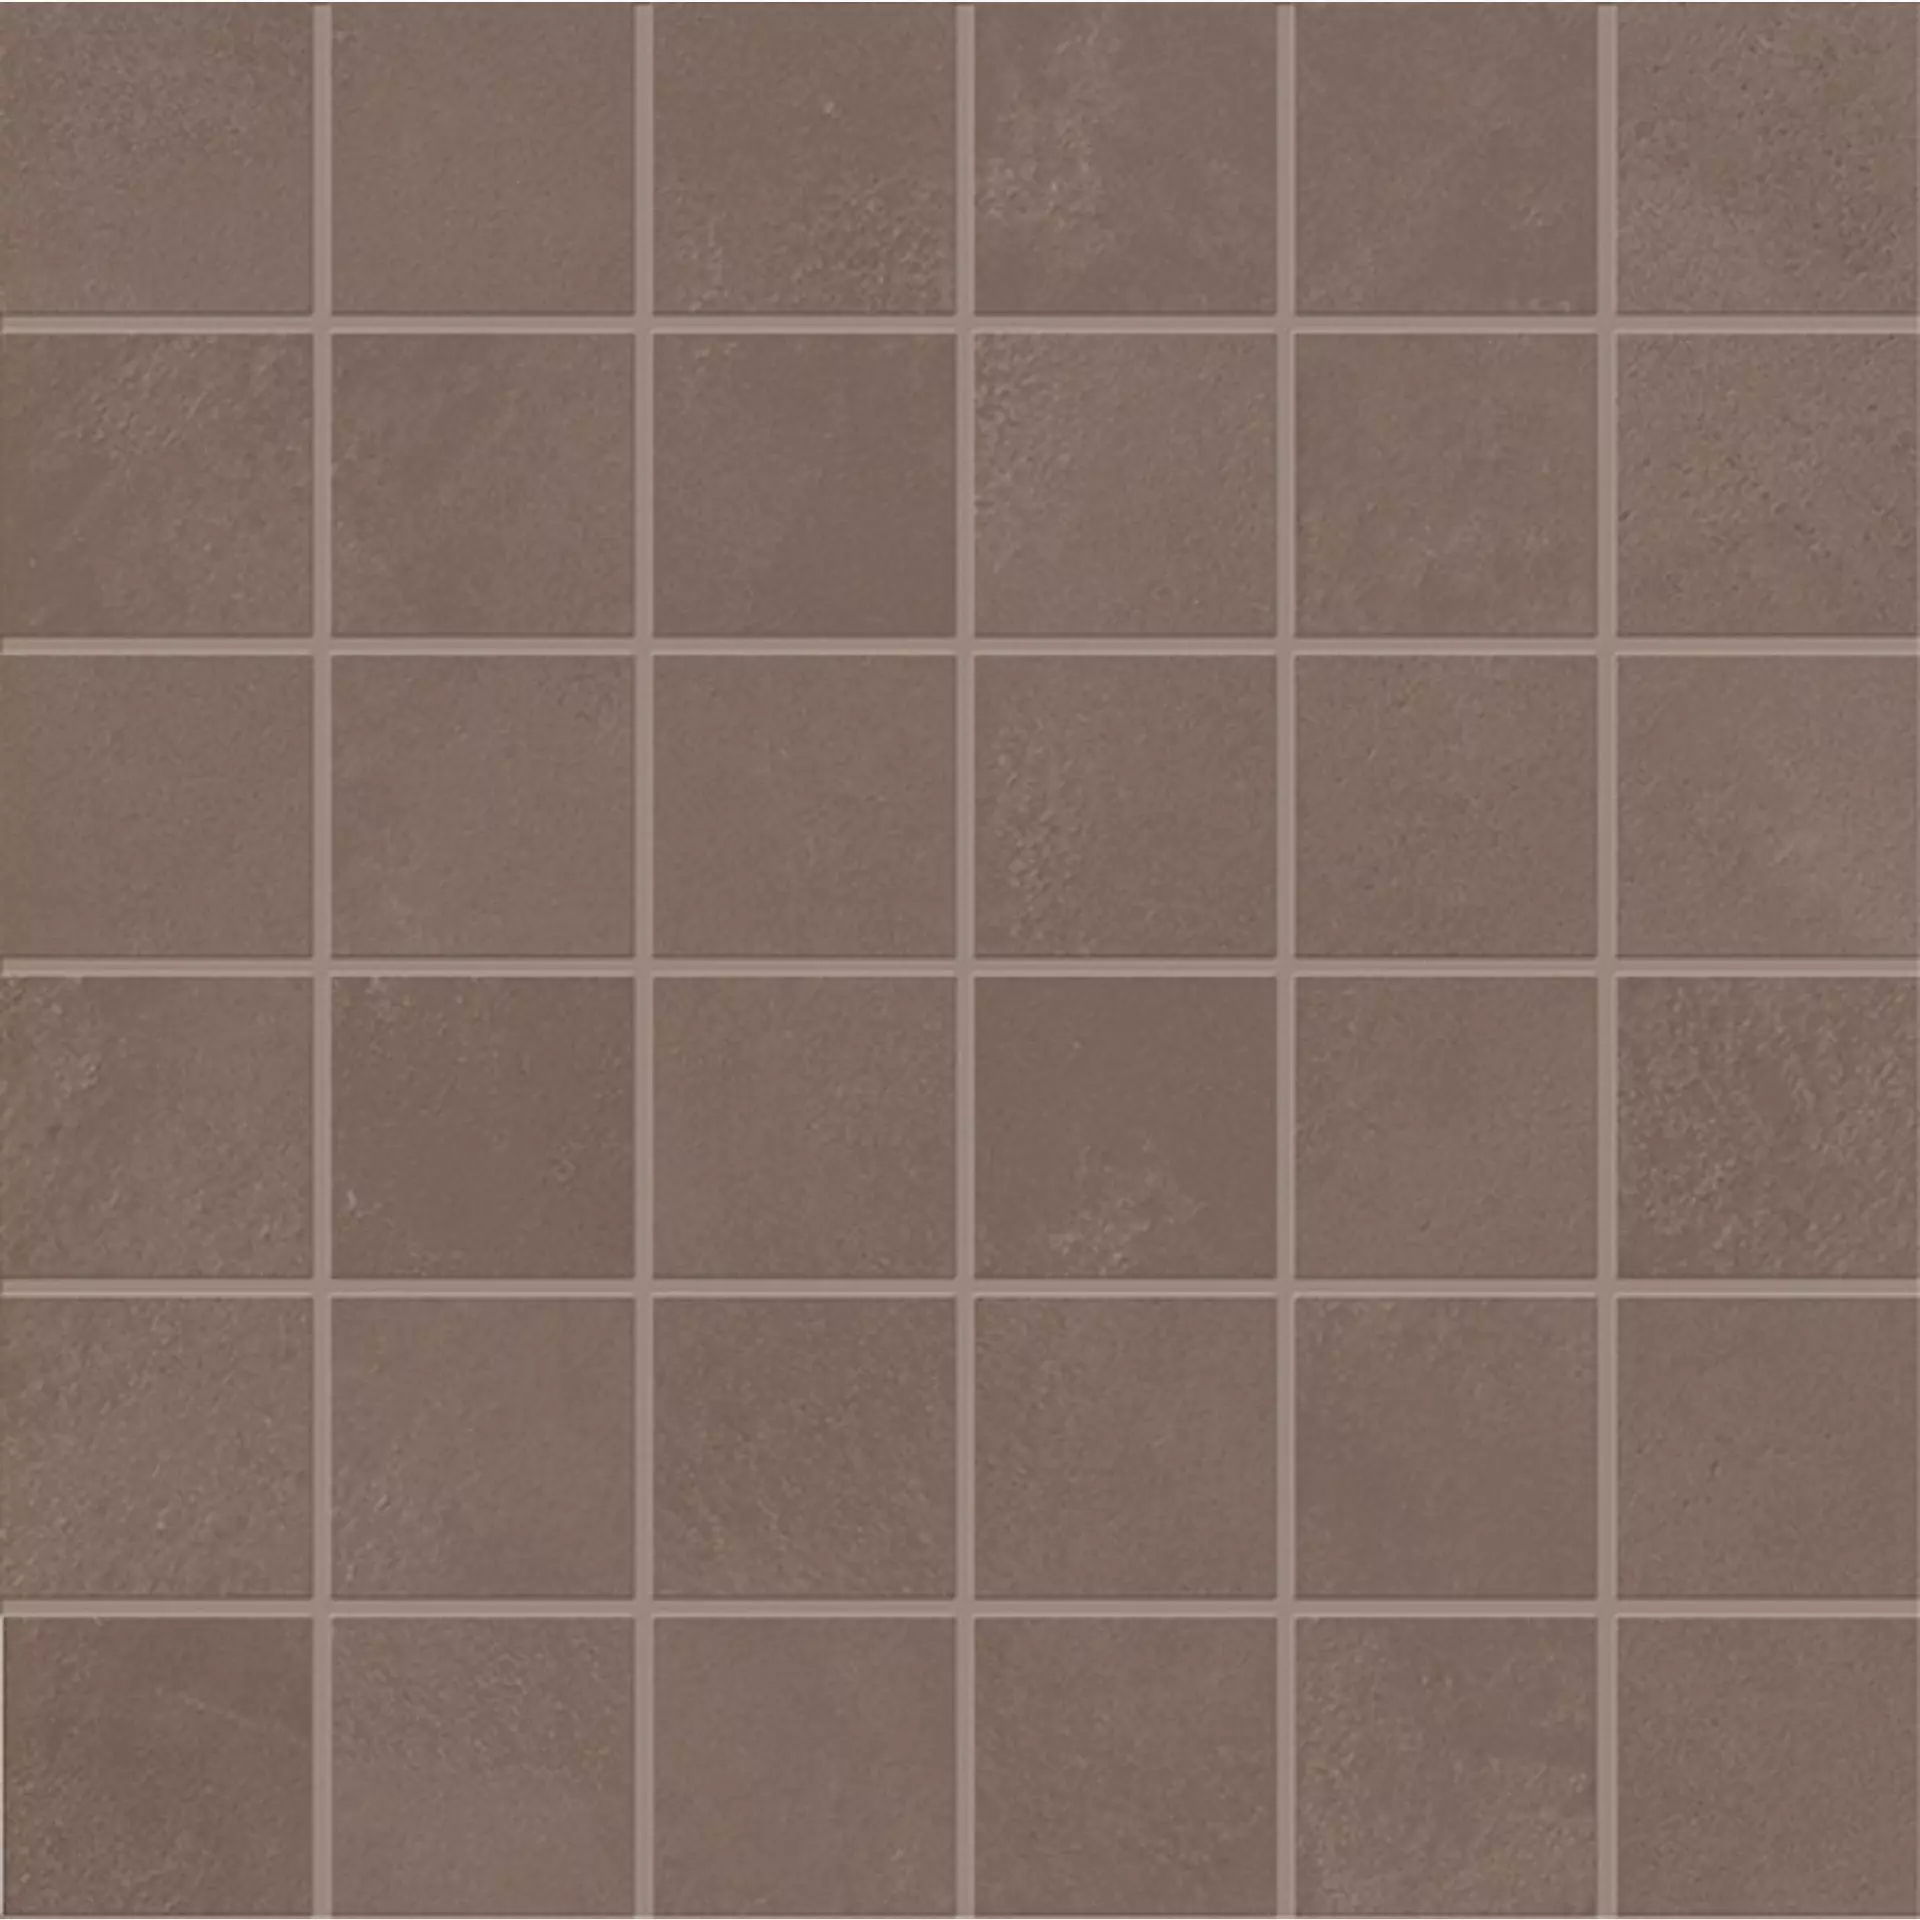 Supergres Colovers Love Brown Naturale – Matt Mosaic LWNM 30x30cm rectified 9mm